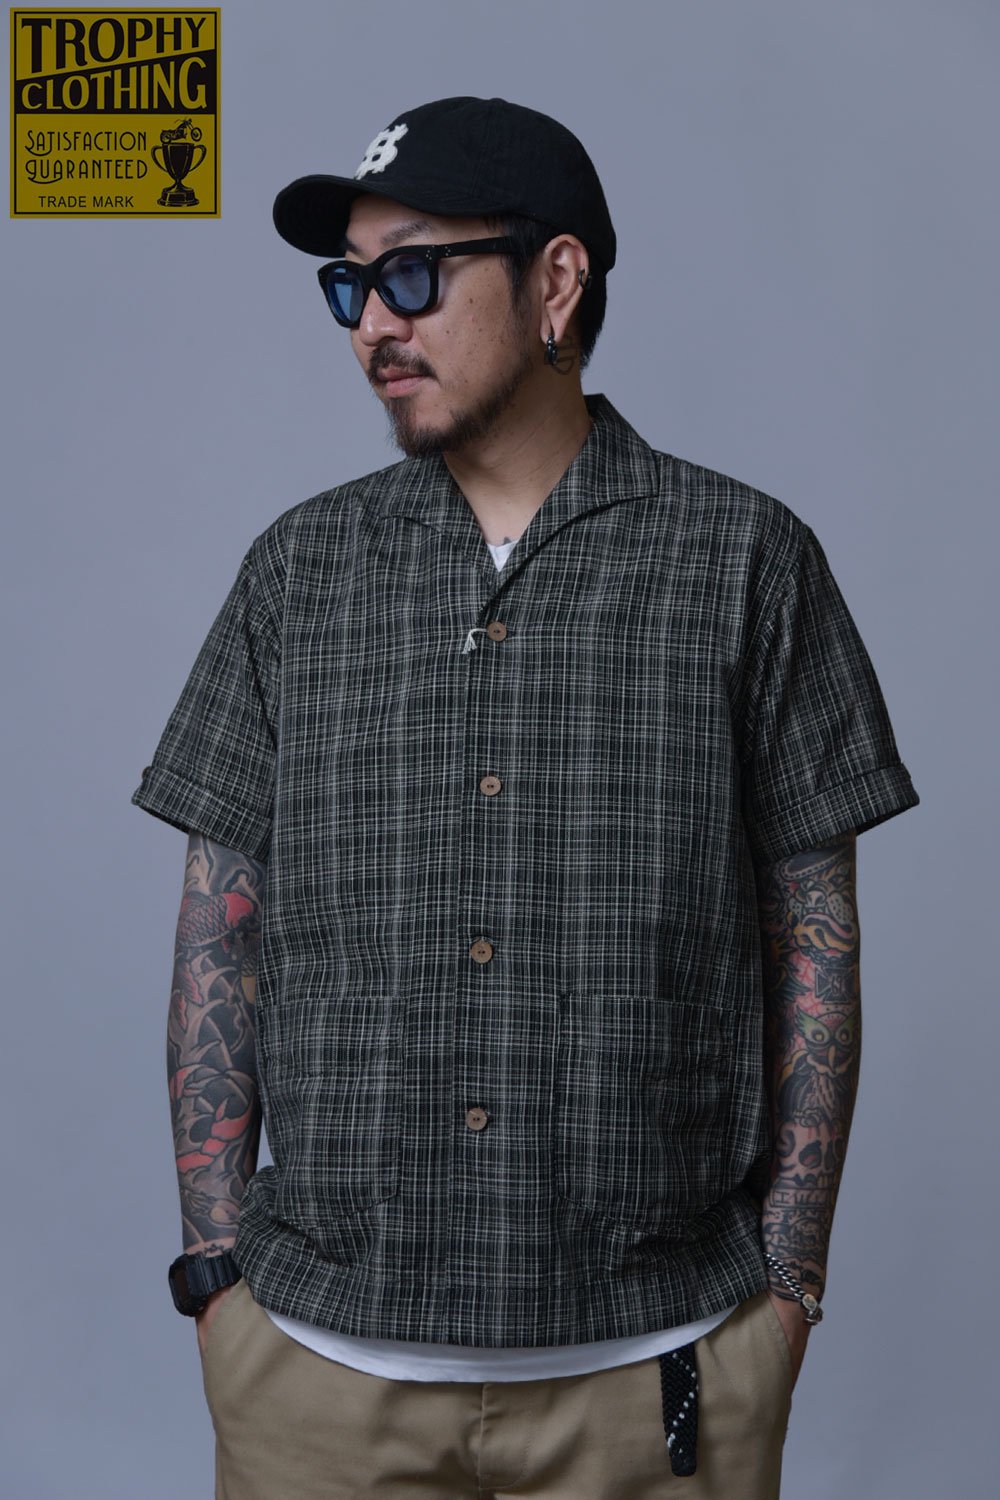 TROPHY CLOTHING(トロフィークロージング) ハバナシャツ HAVANA S/S SHIRT TR23SS-407 通販正規取扱 |  ハーレムストア公式通販サイト